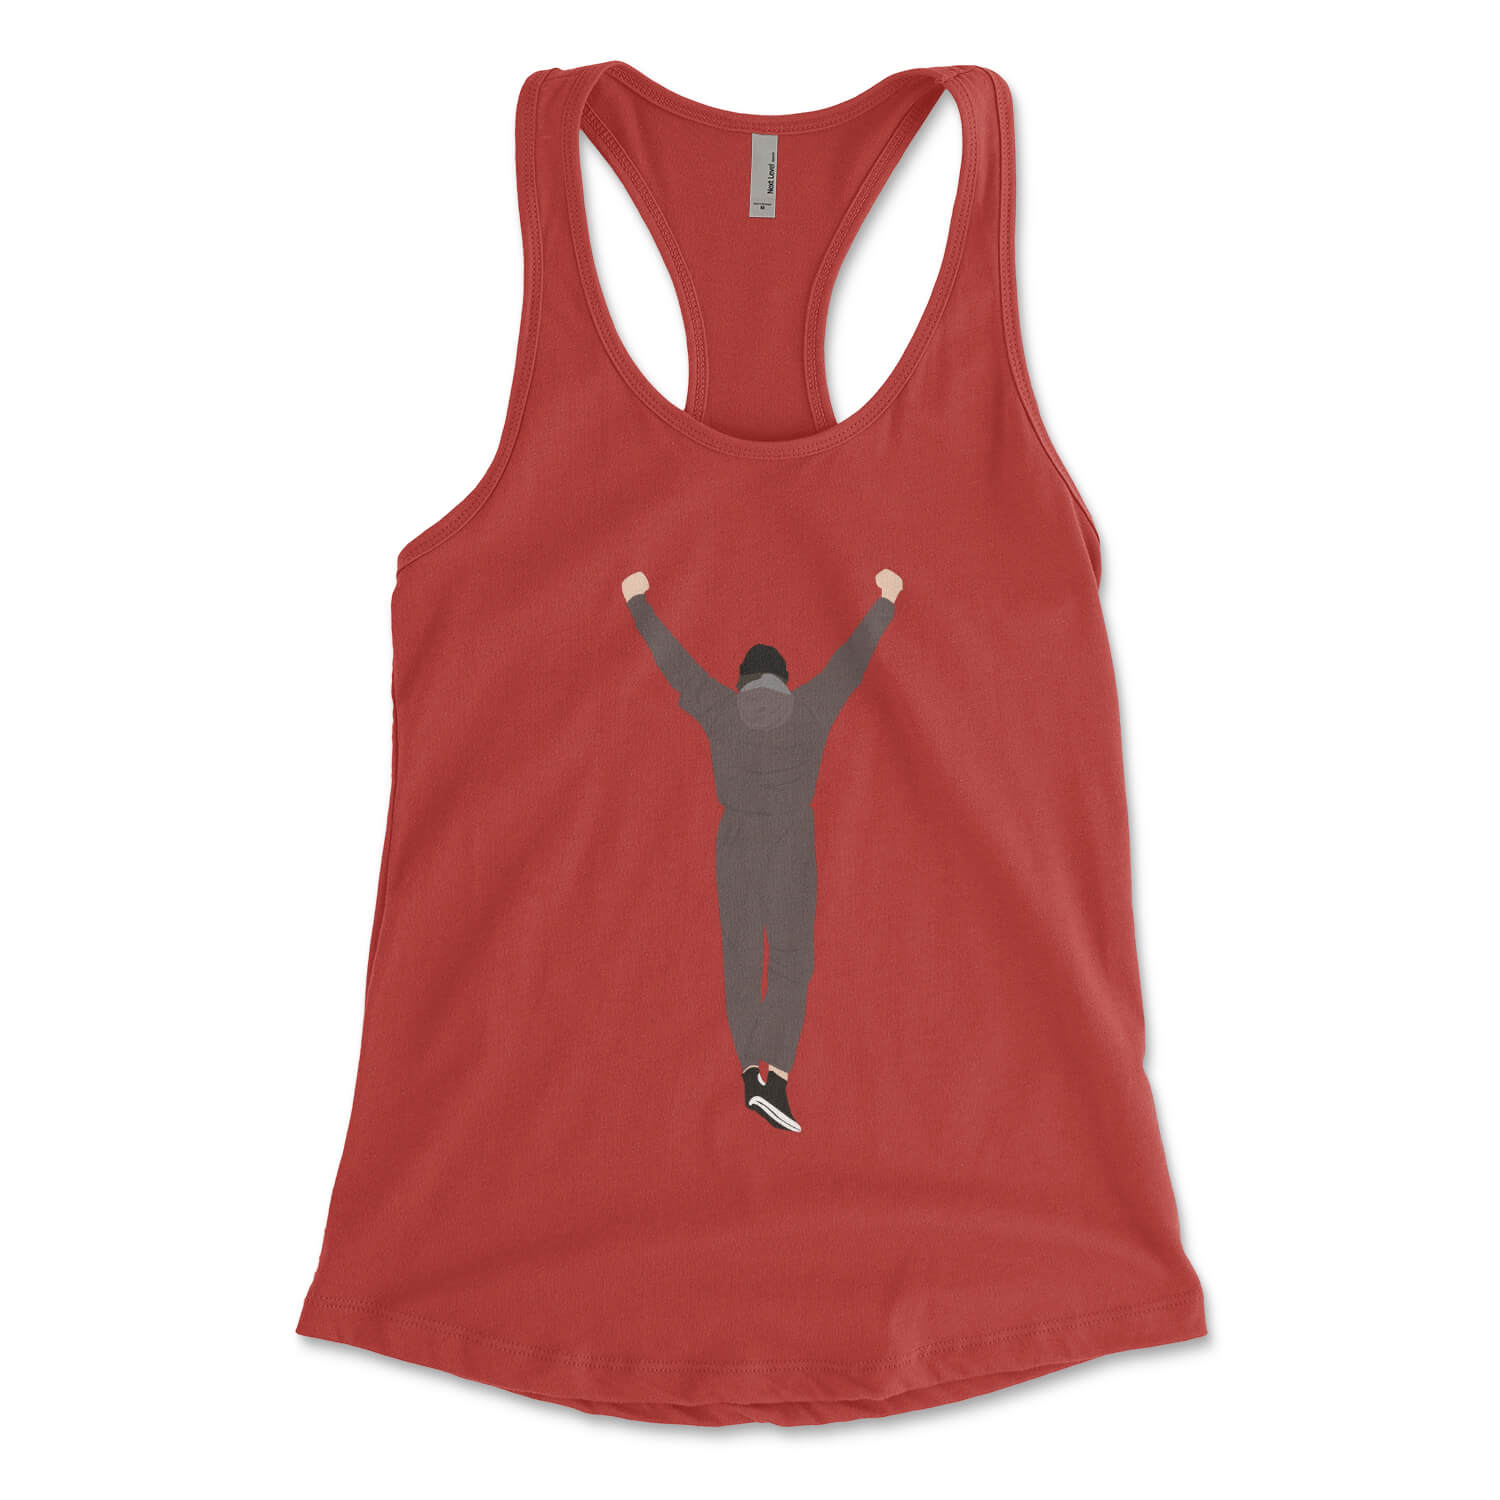 Rocky red womens racerback tank top from Phillygoat